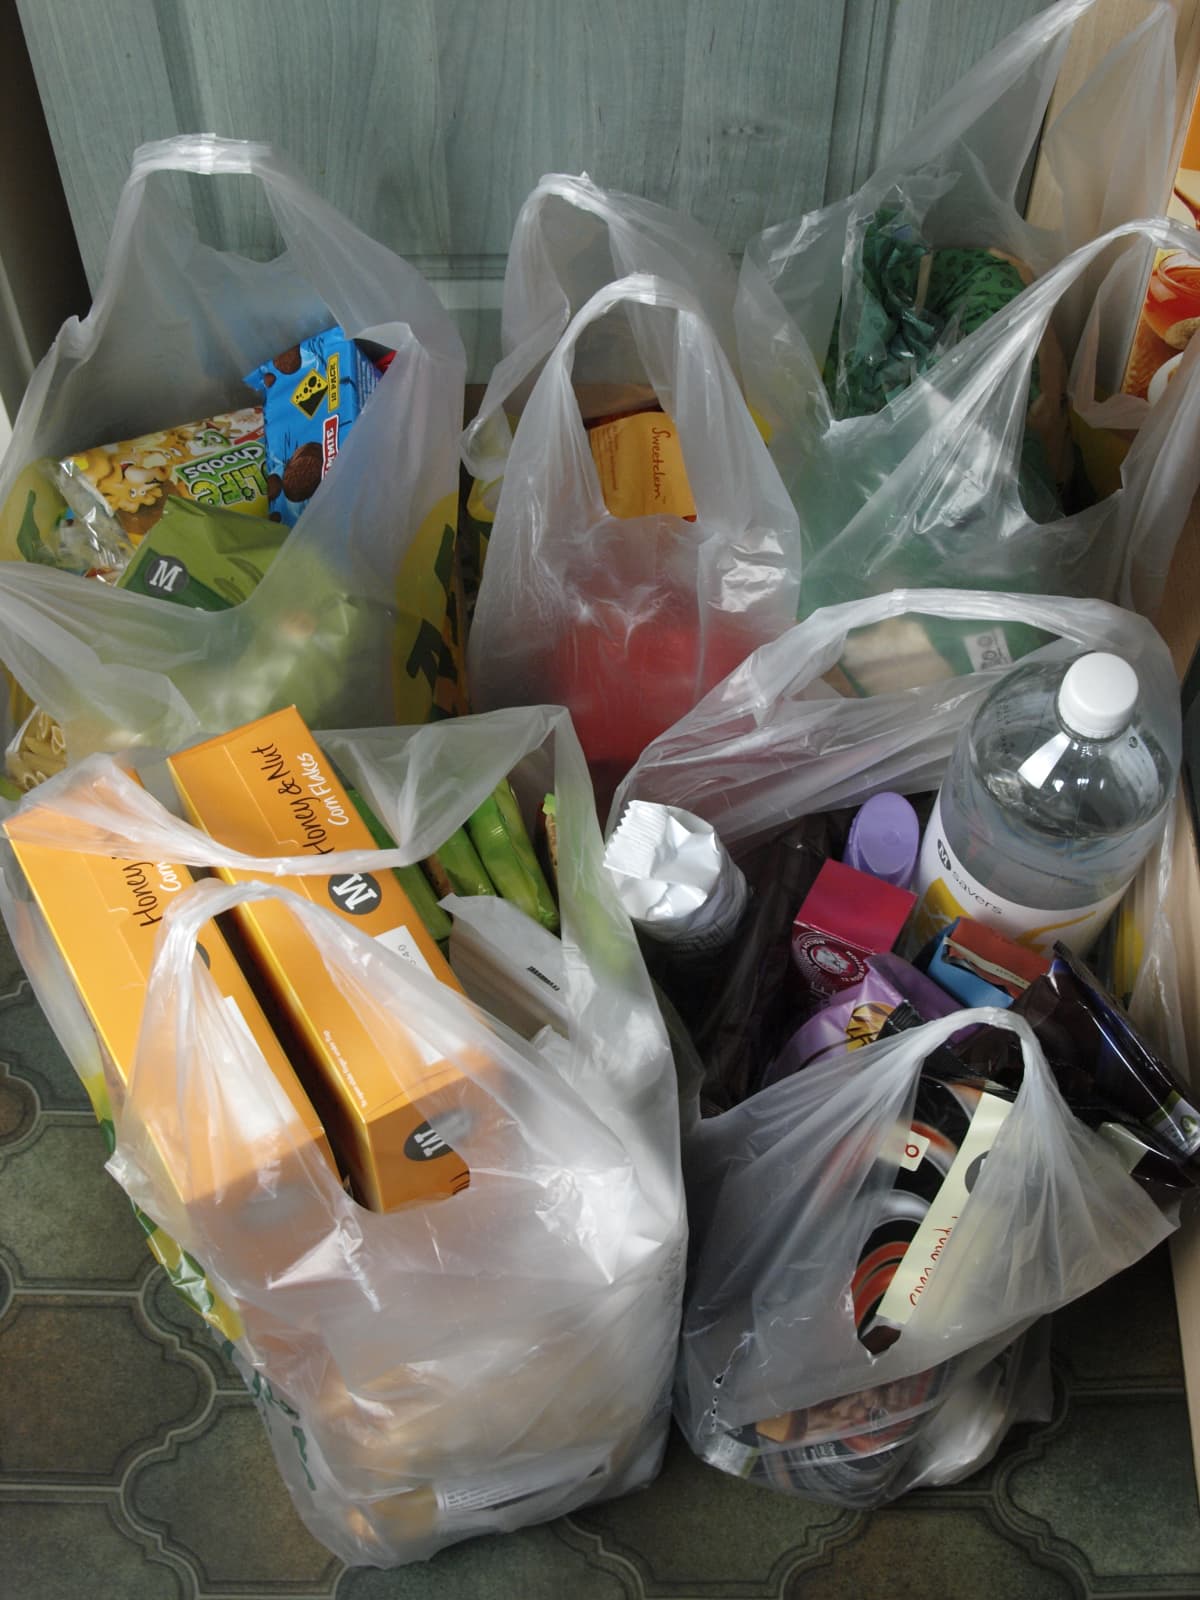 Bags of shopping from Morrisons, UK. (Photo by: Education Images/Universal Images Group via Getty Images)